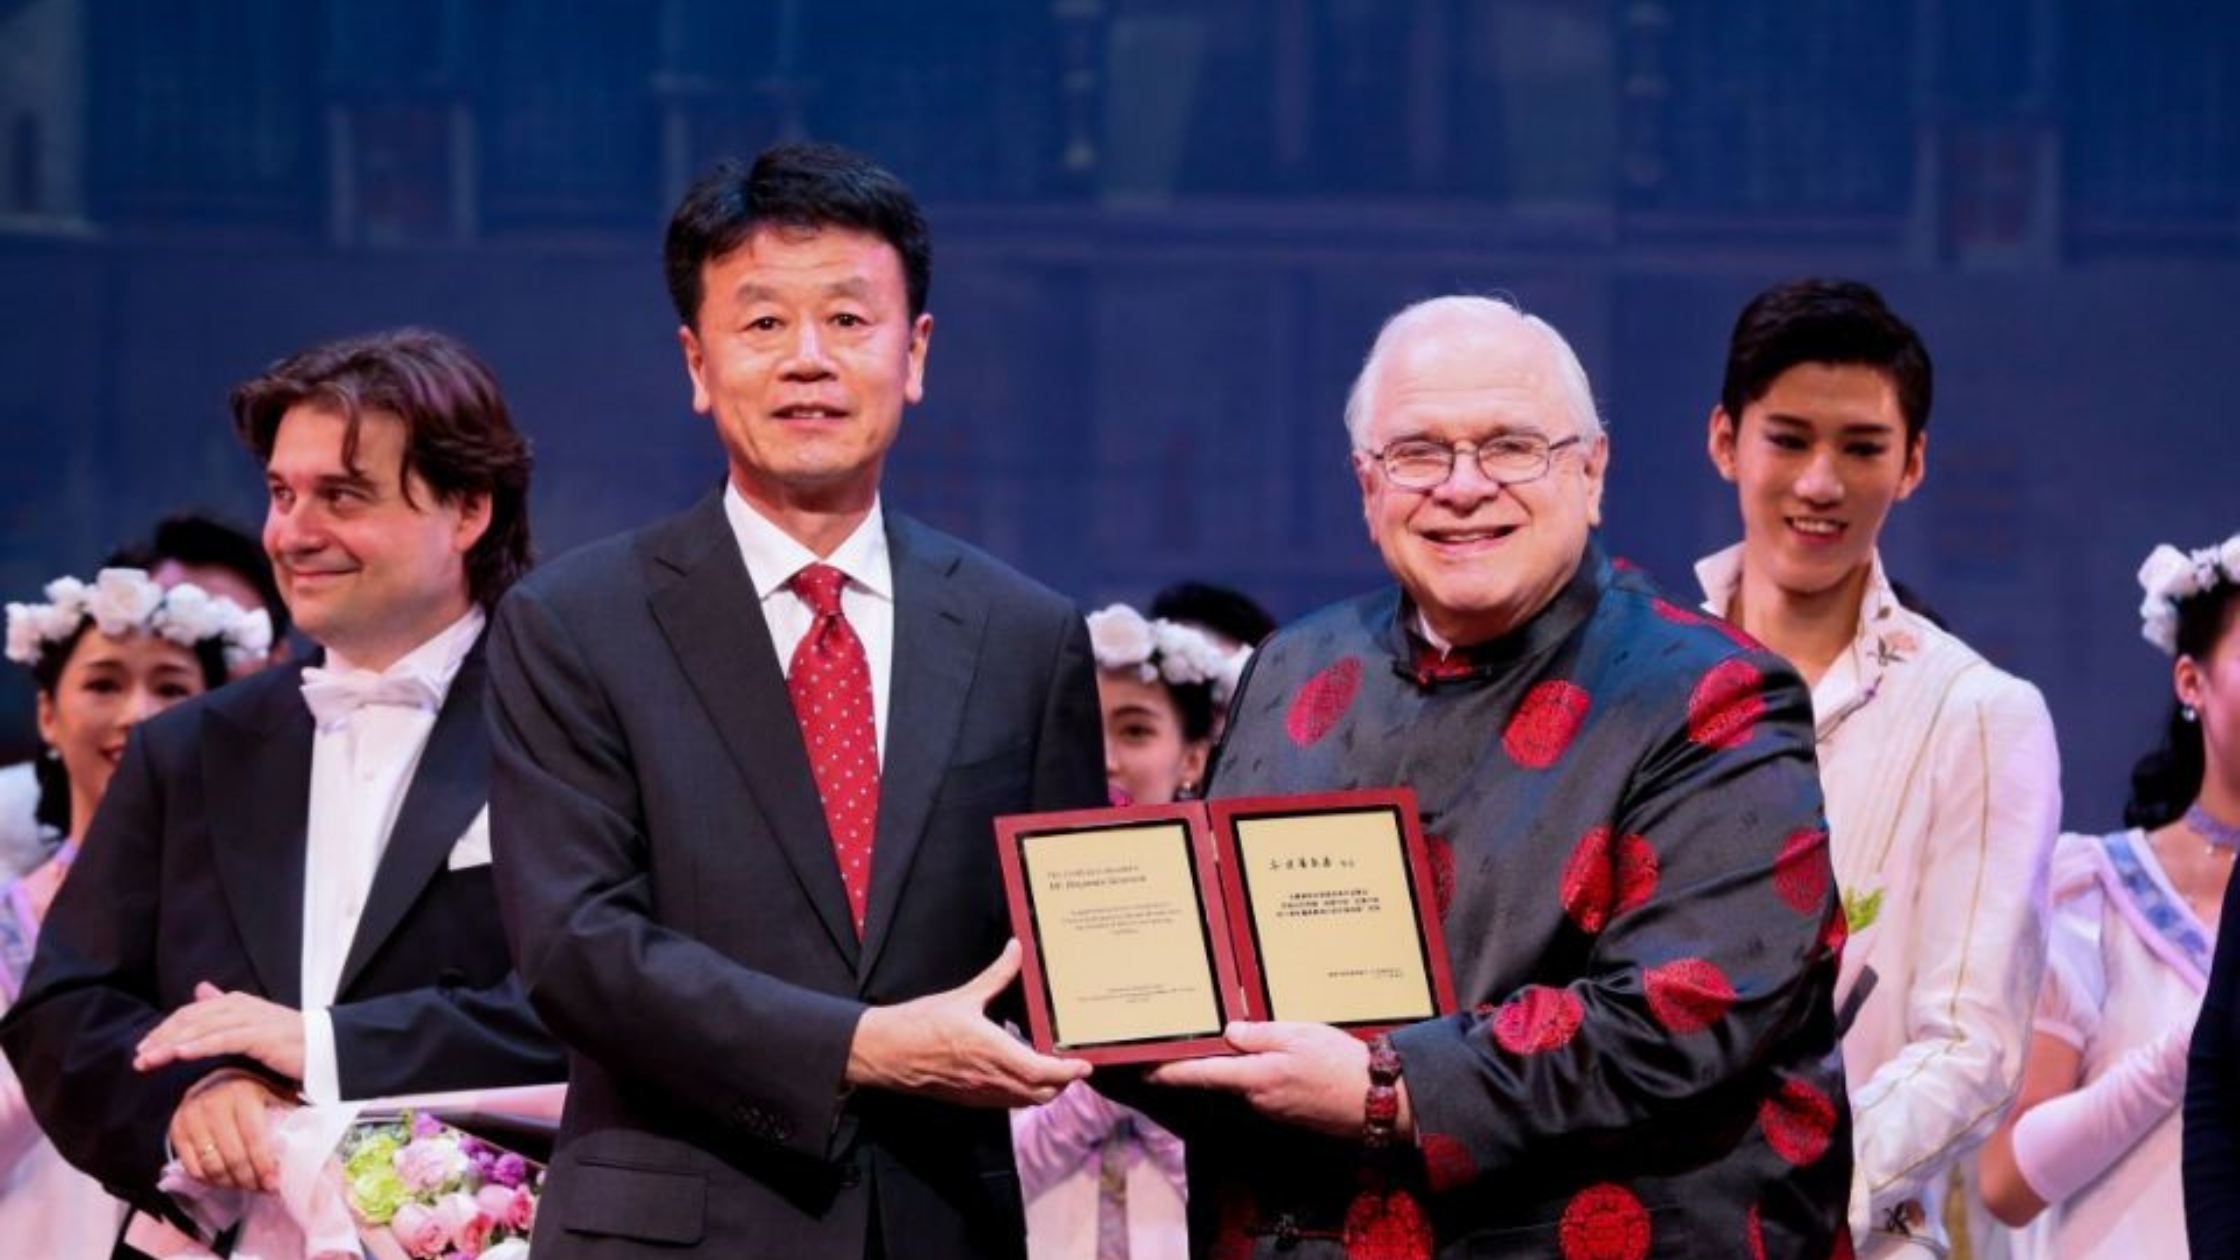 Ben Stevenson, O.B.E. receiving an award onstage after a performance of the National Ballet of China.